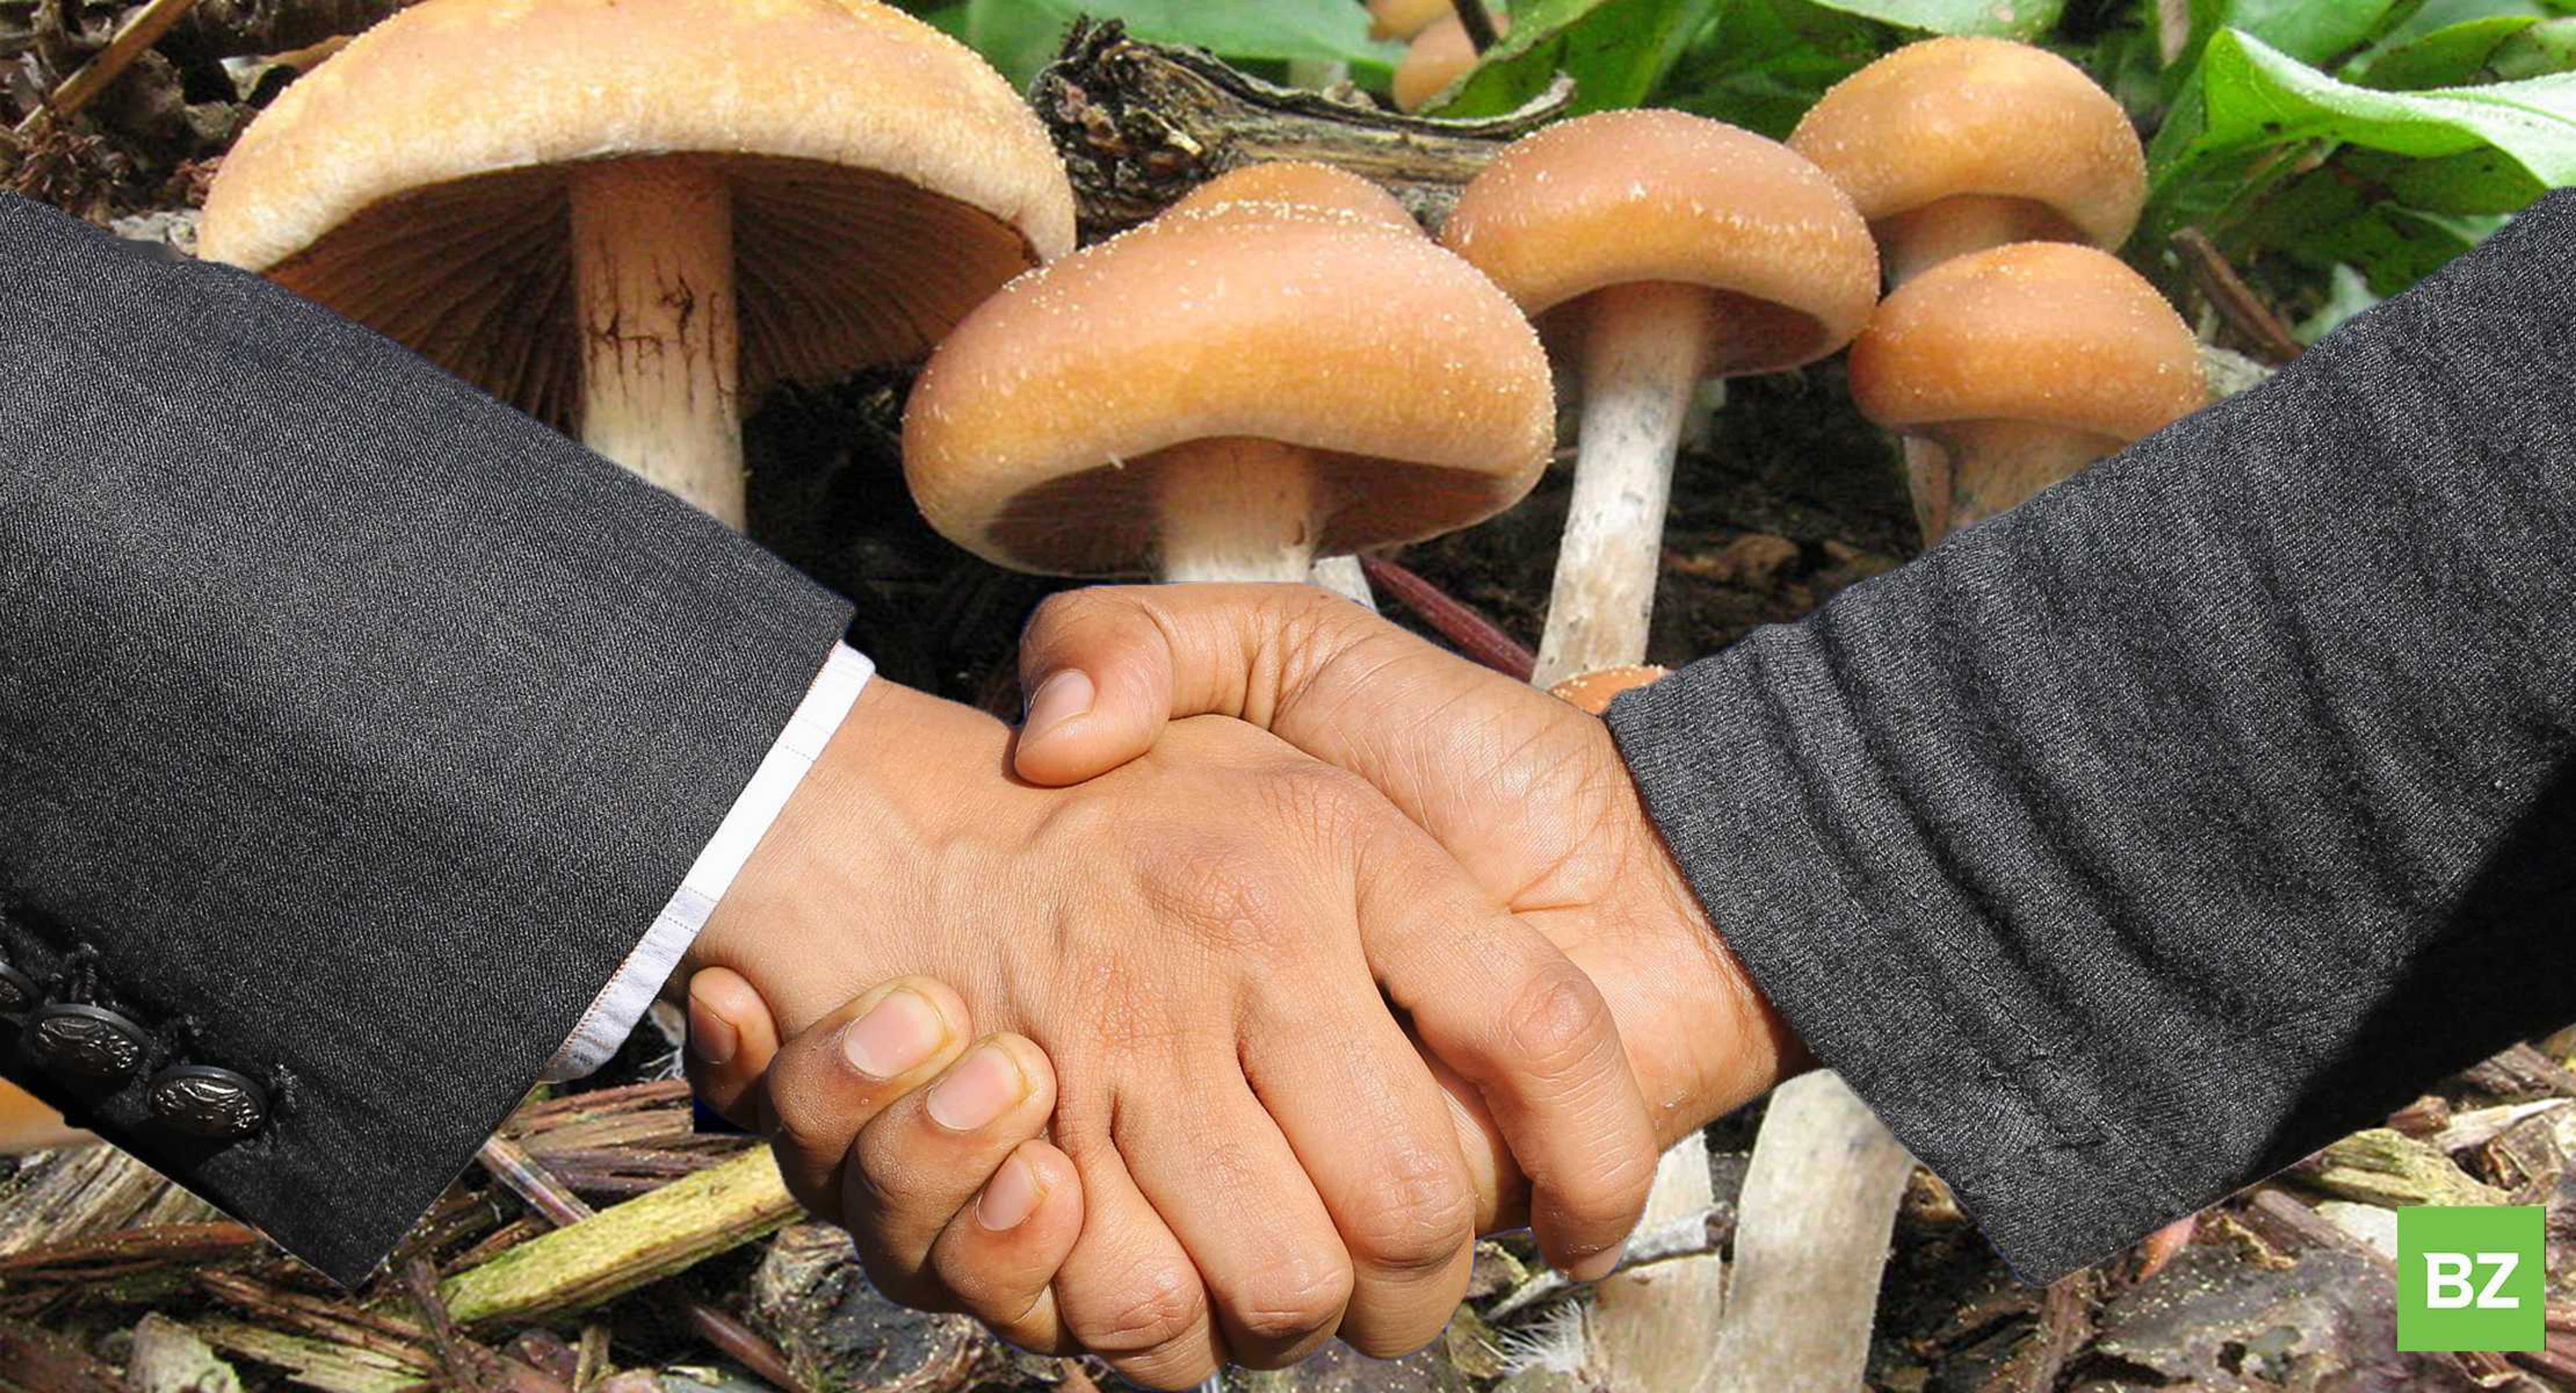 Psychedelic Mushrooms Are Going Global: Supply Deal With UK-Based Wellness Company Moves Forward